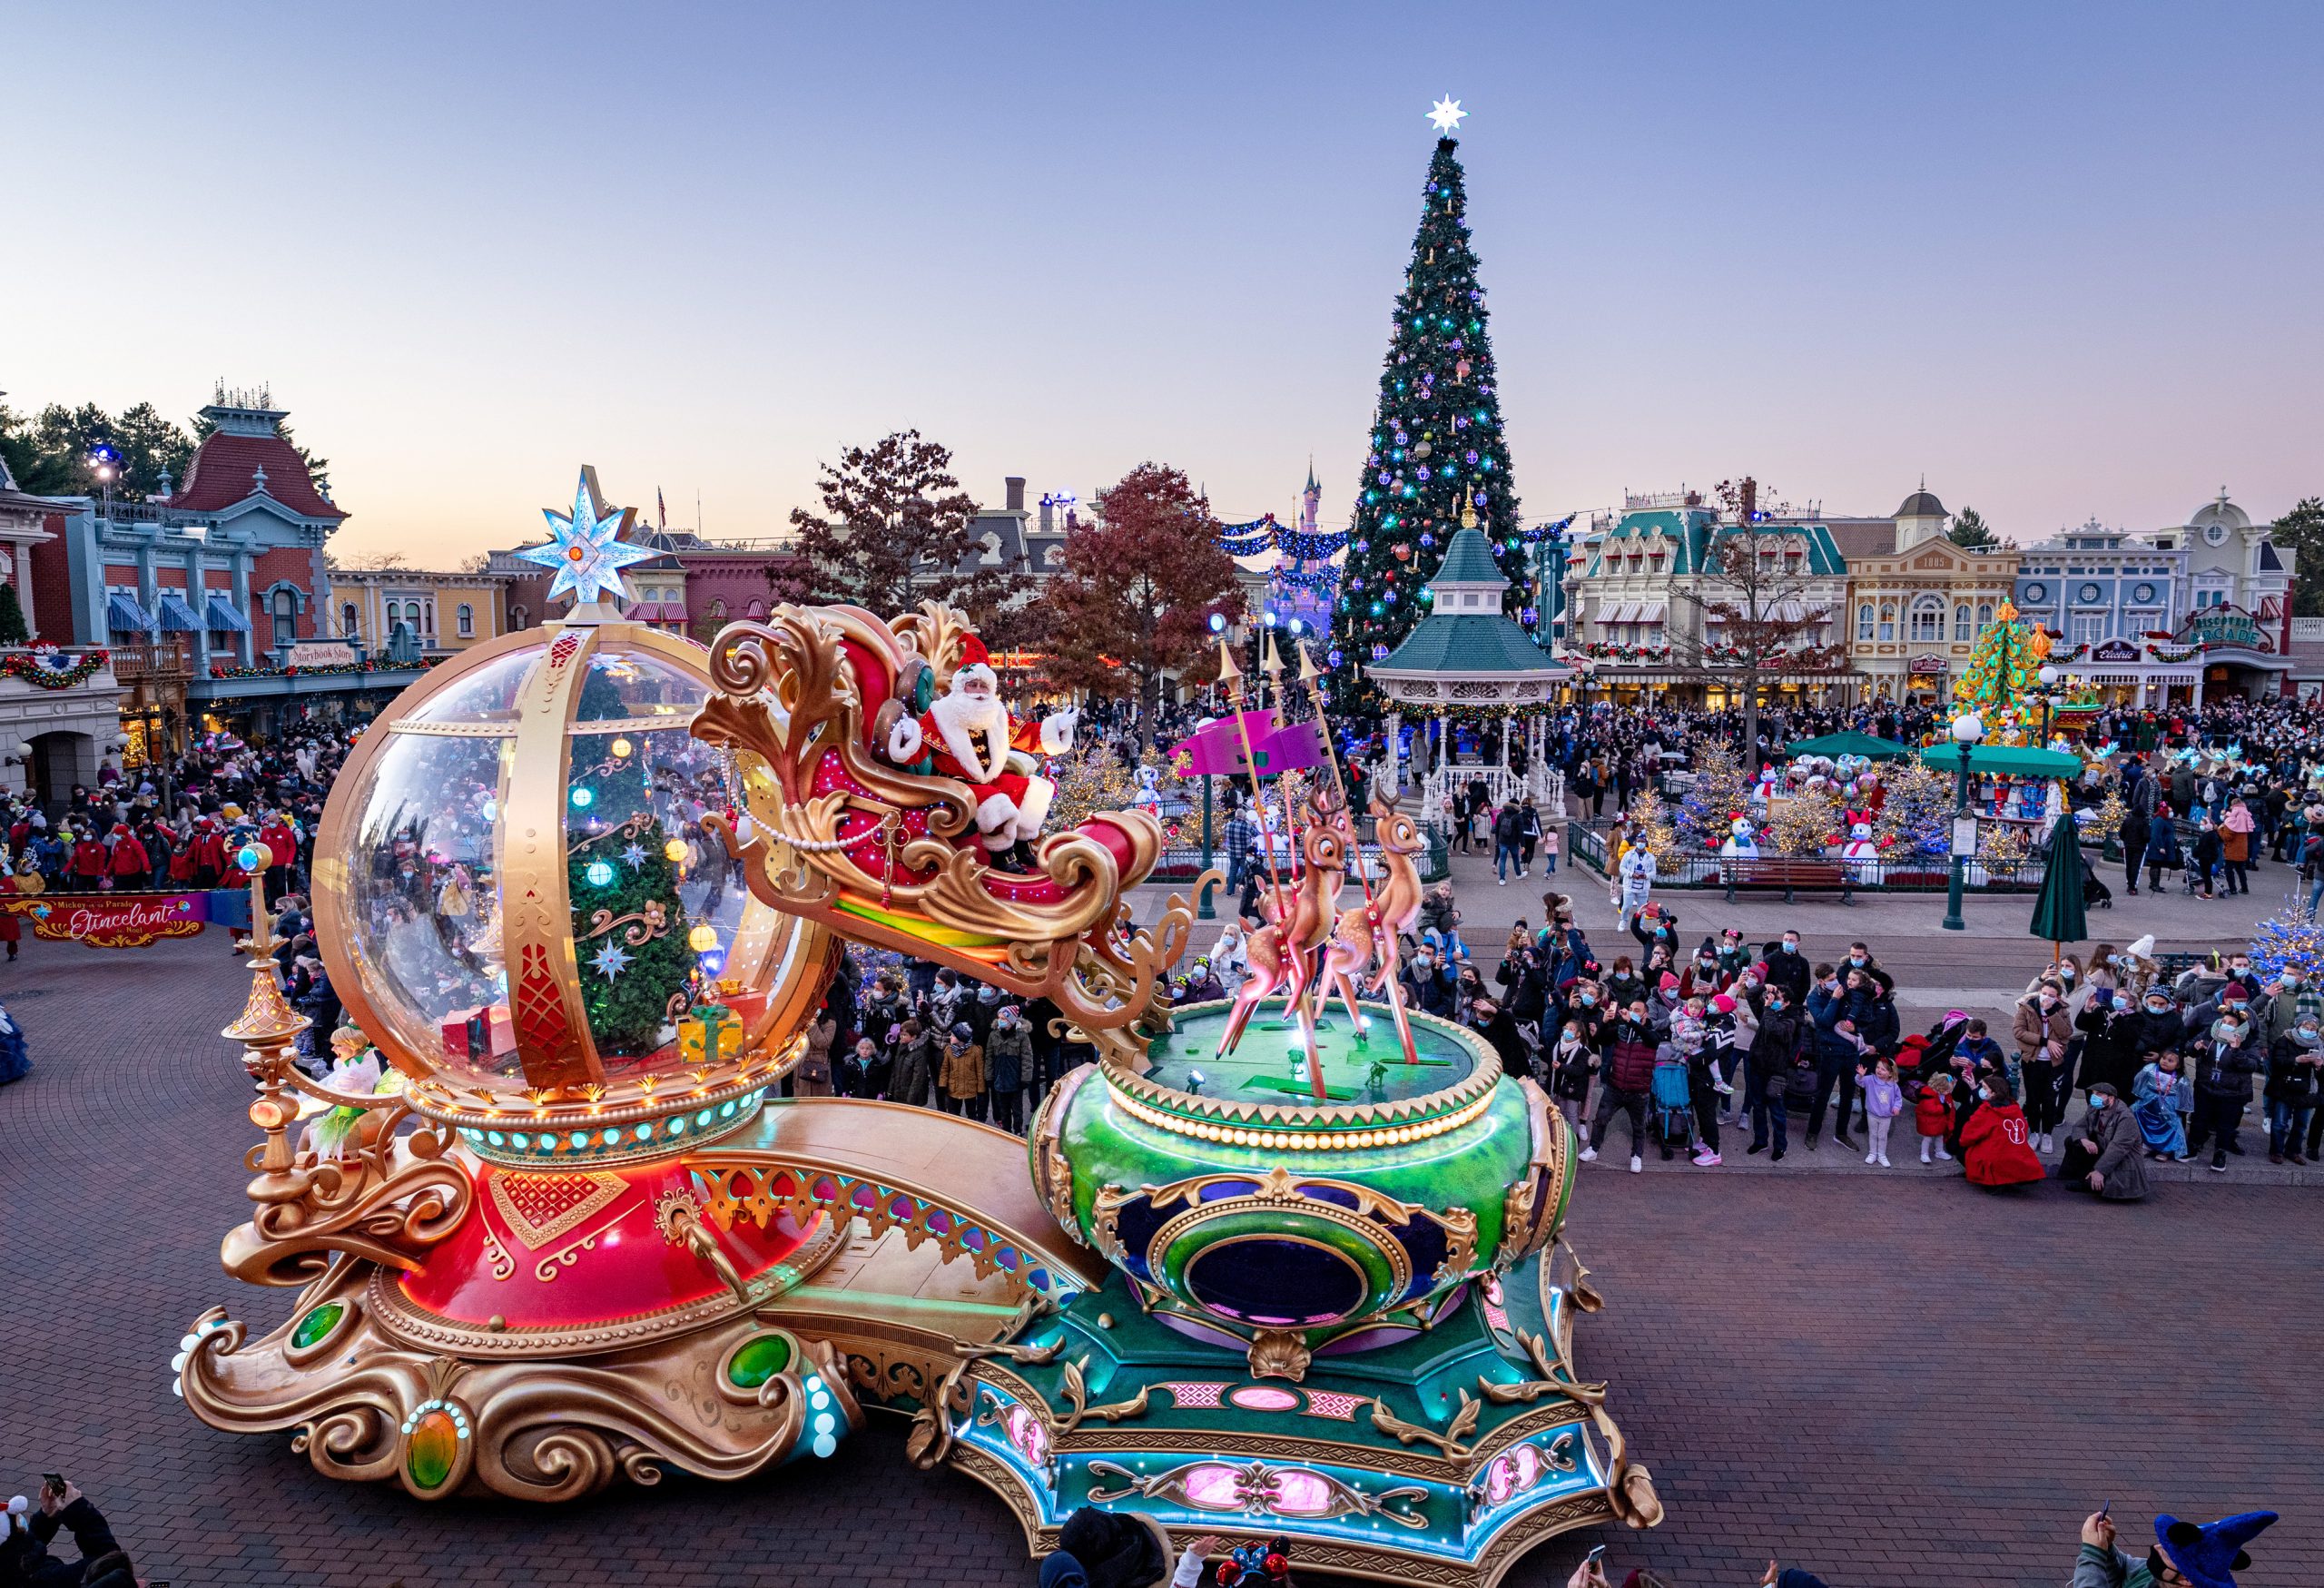 Disneyland Paris Launches Enchanted Christmas Season with a New